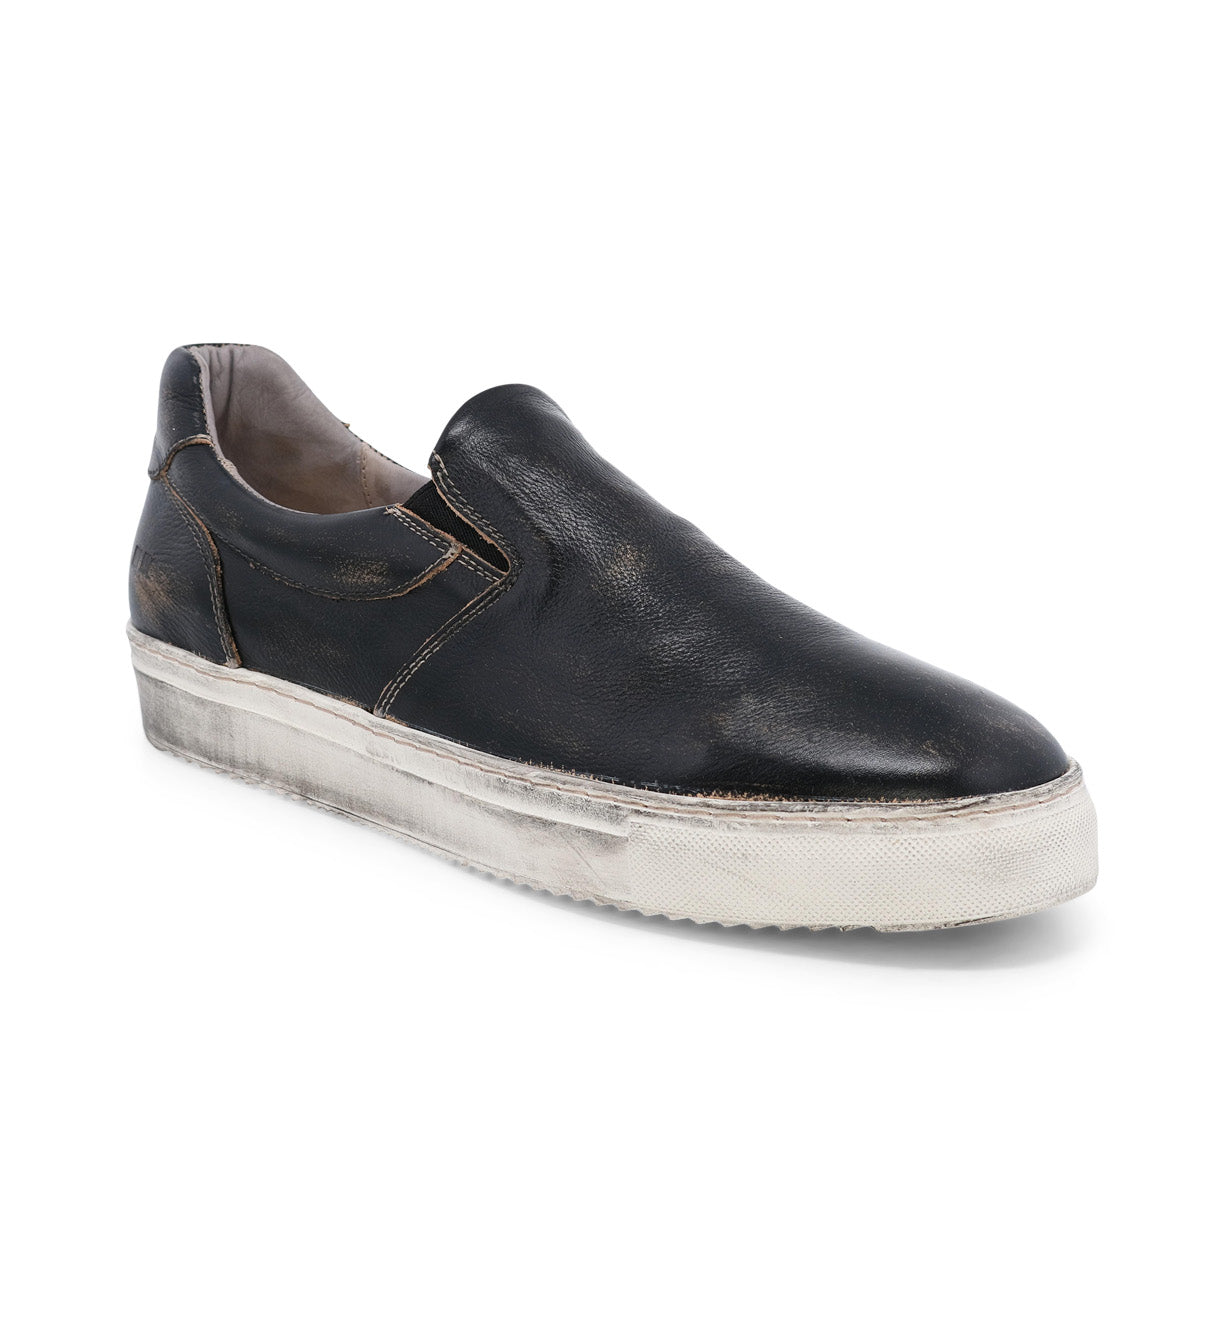 Men's black leather slip on sneakers called Harry by Bed Stu.